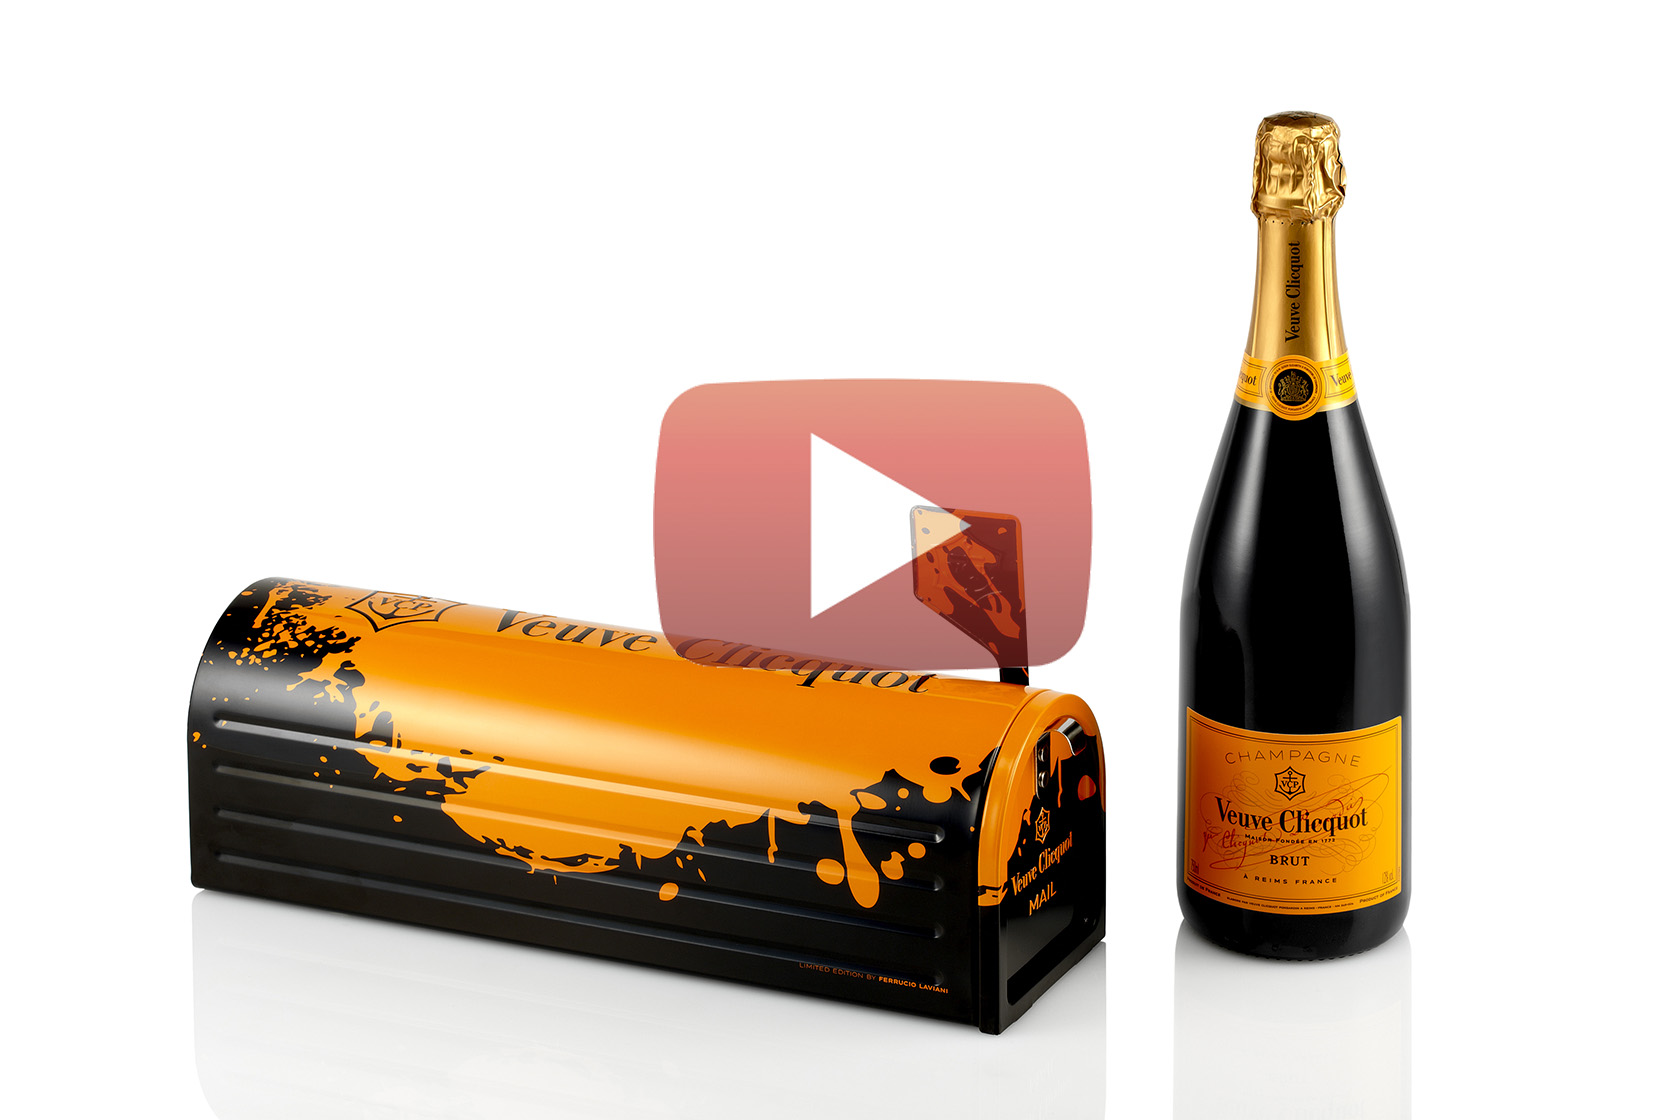 VEUVE CLICQUOT LAUNCHES ITS FIRST GLOBAL DESIGN INITIATIVE TO FIND DESIGNER  OF THE 2015 LIMITED EDITION MAILBOX